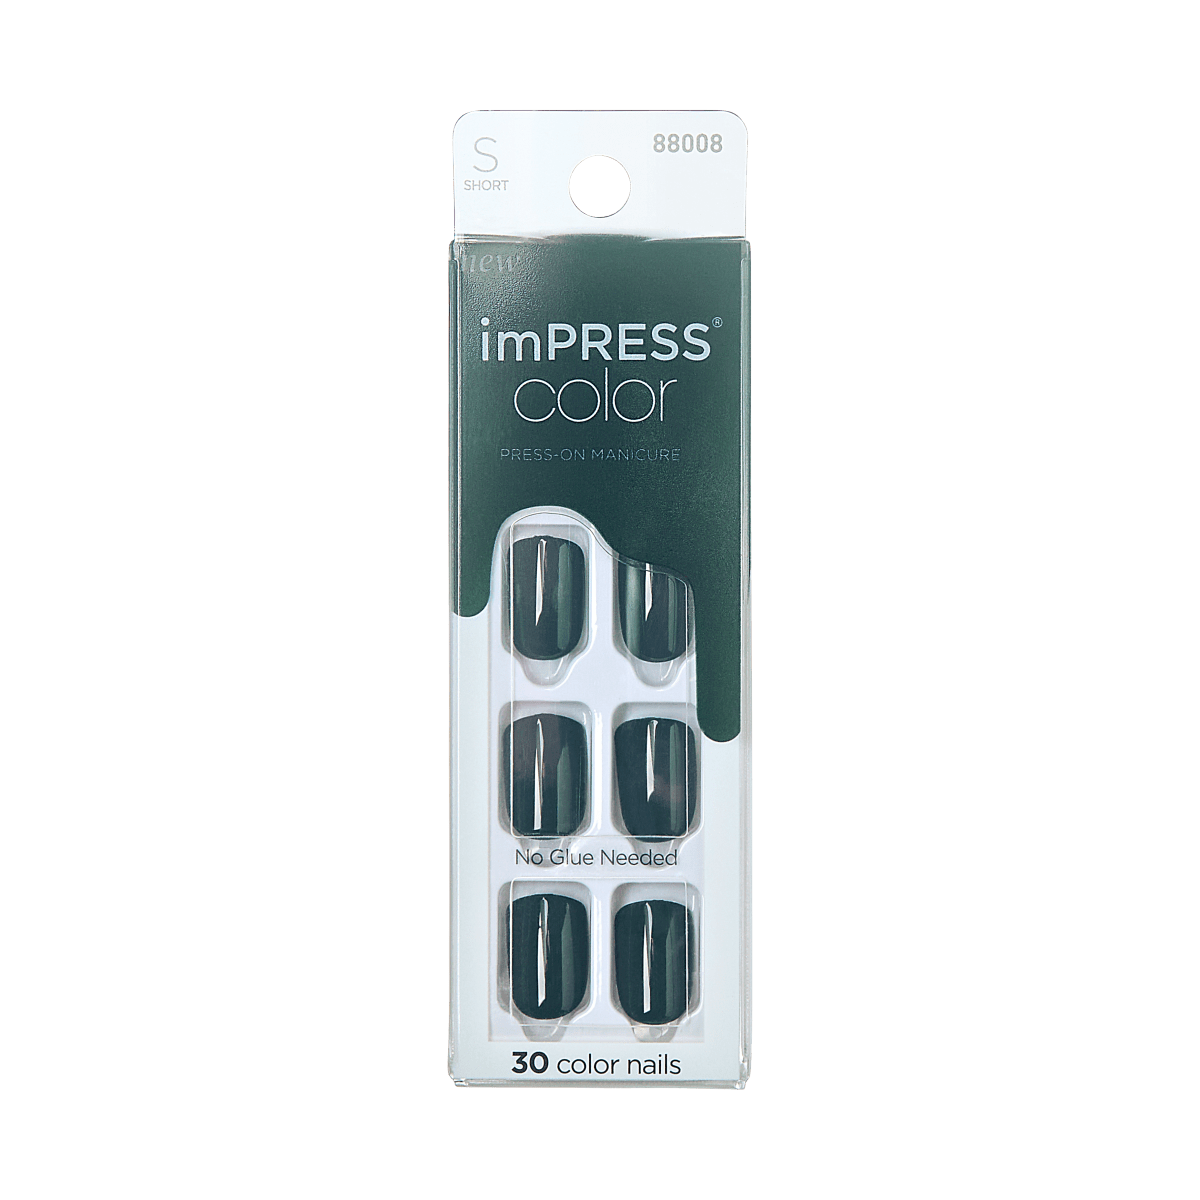 imPRESS Color Press-On Manicure - Pine and You